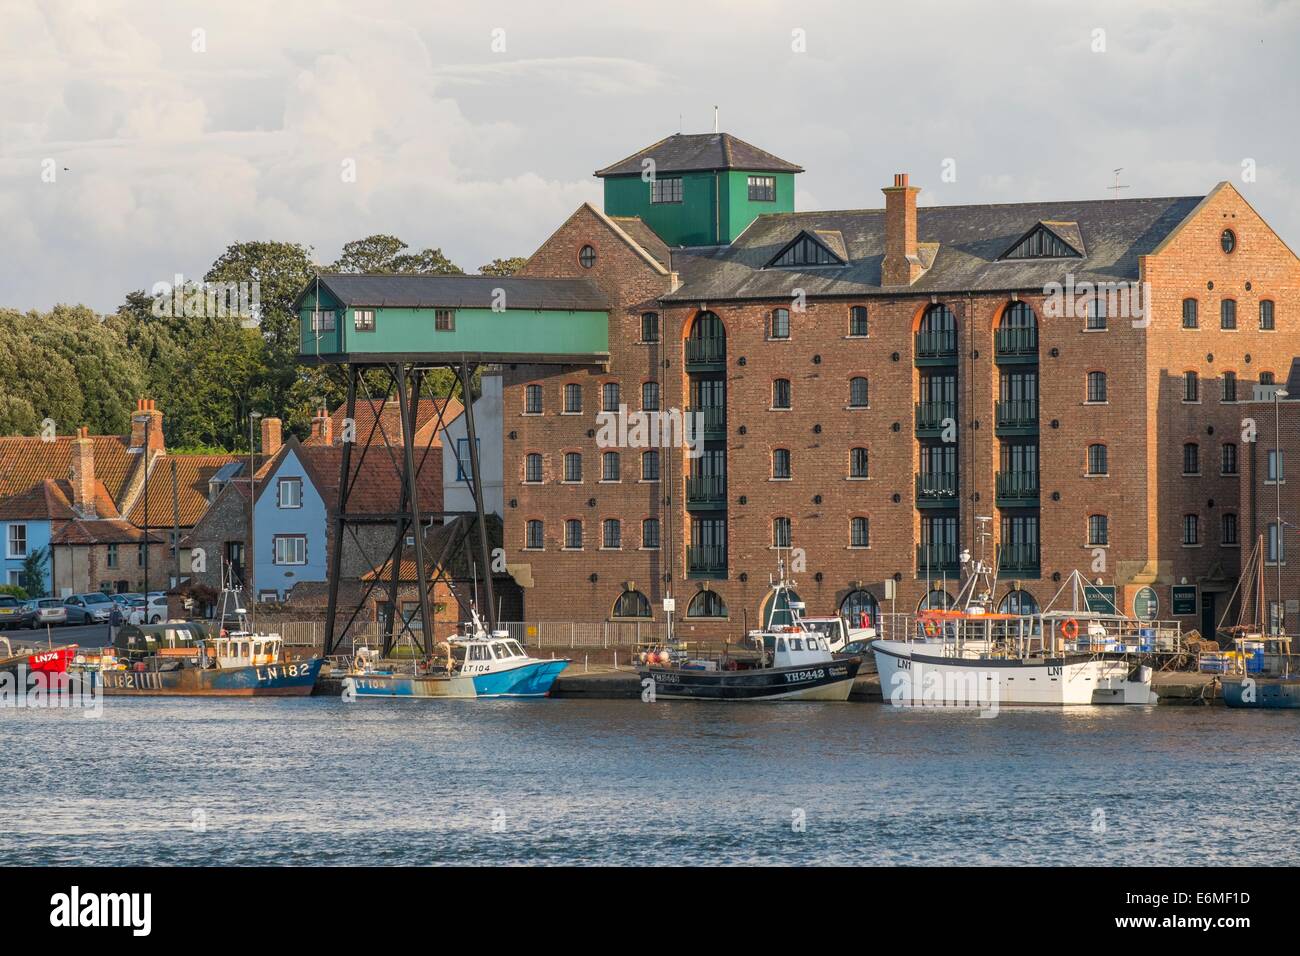 View of the quay at Wells Harbour, featuring the old maltings development. Stock Photo